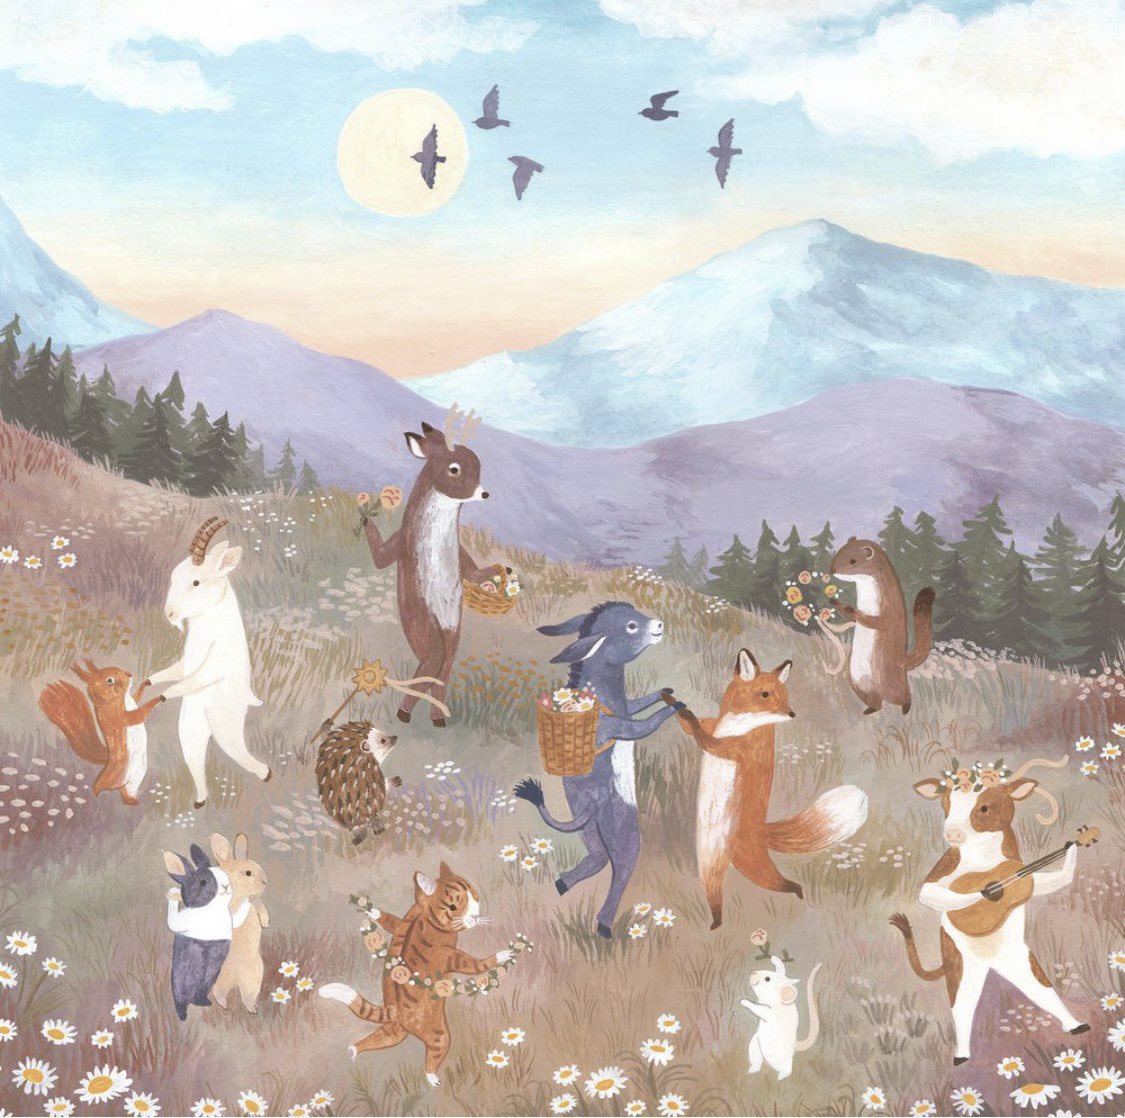 The kind of Midsummer celebration I would love to attend 

Art by Cécile Berrubé